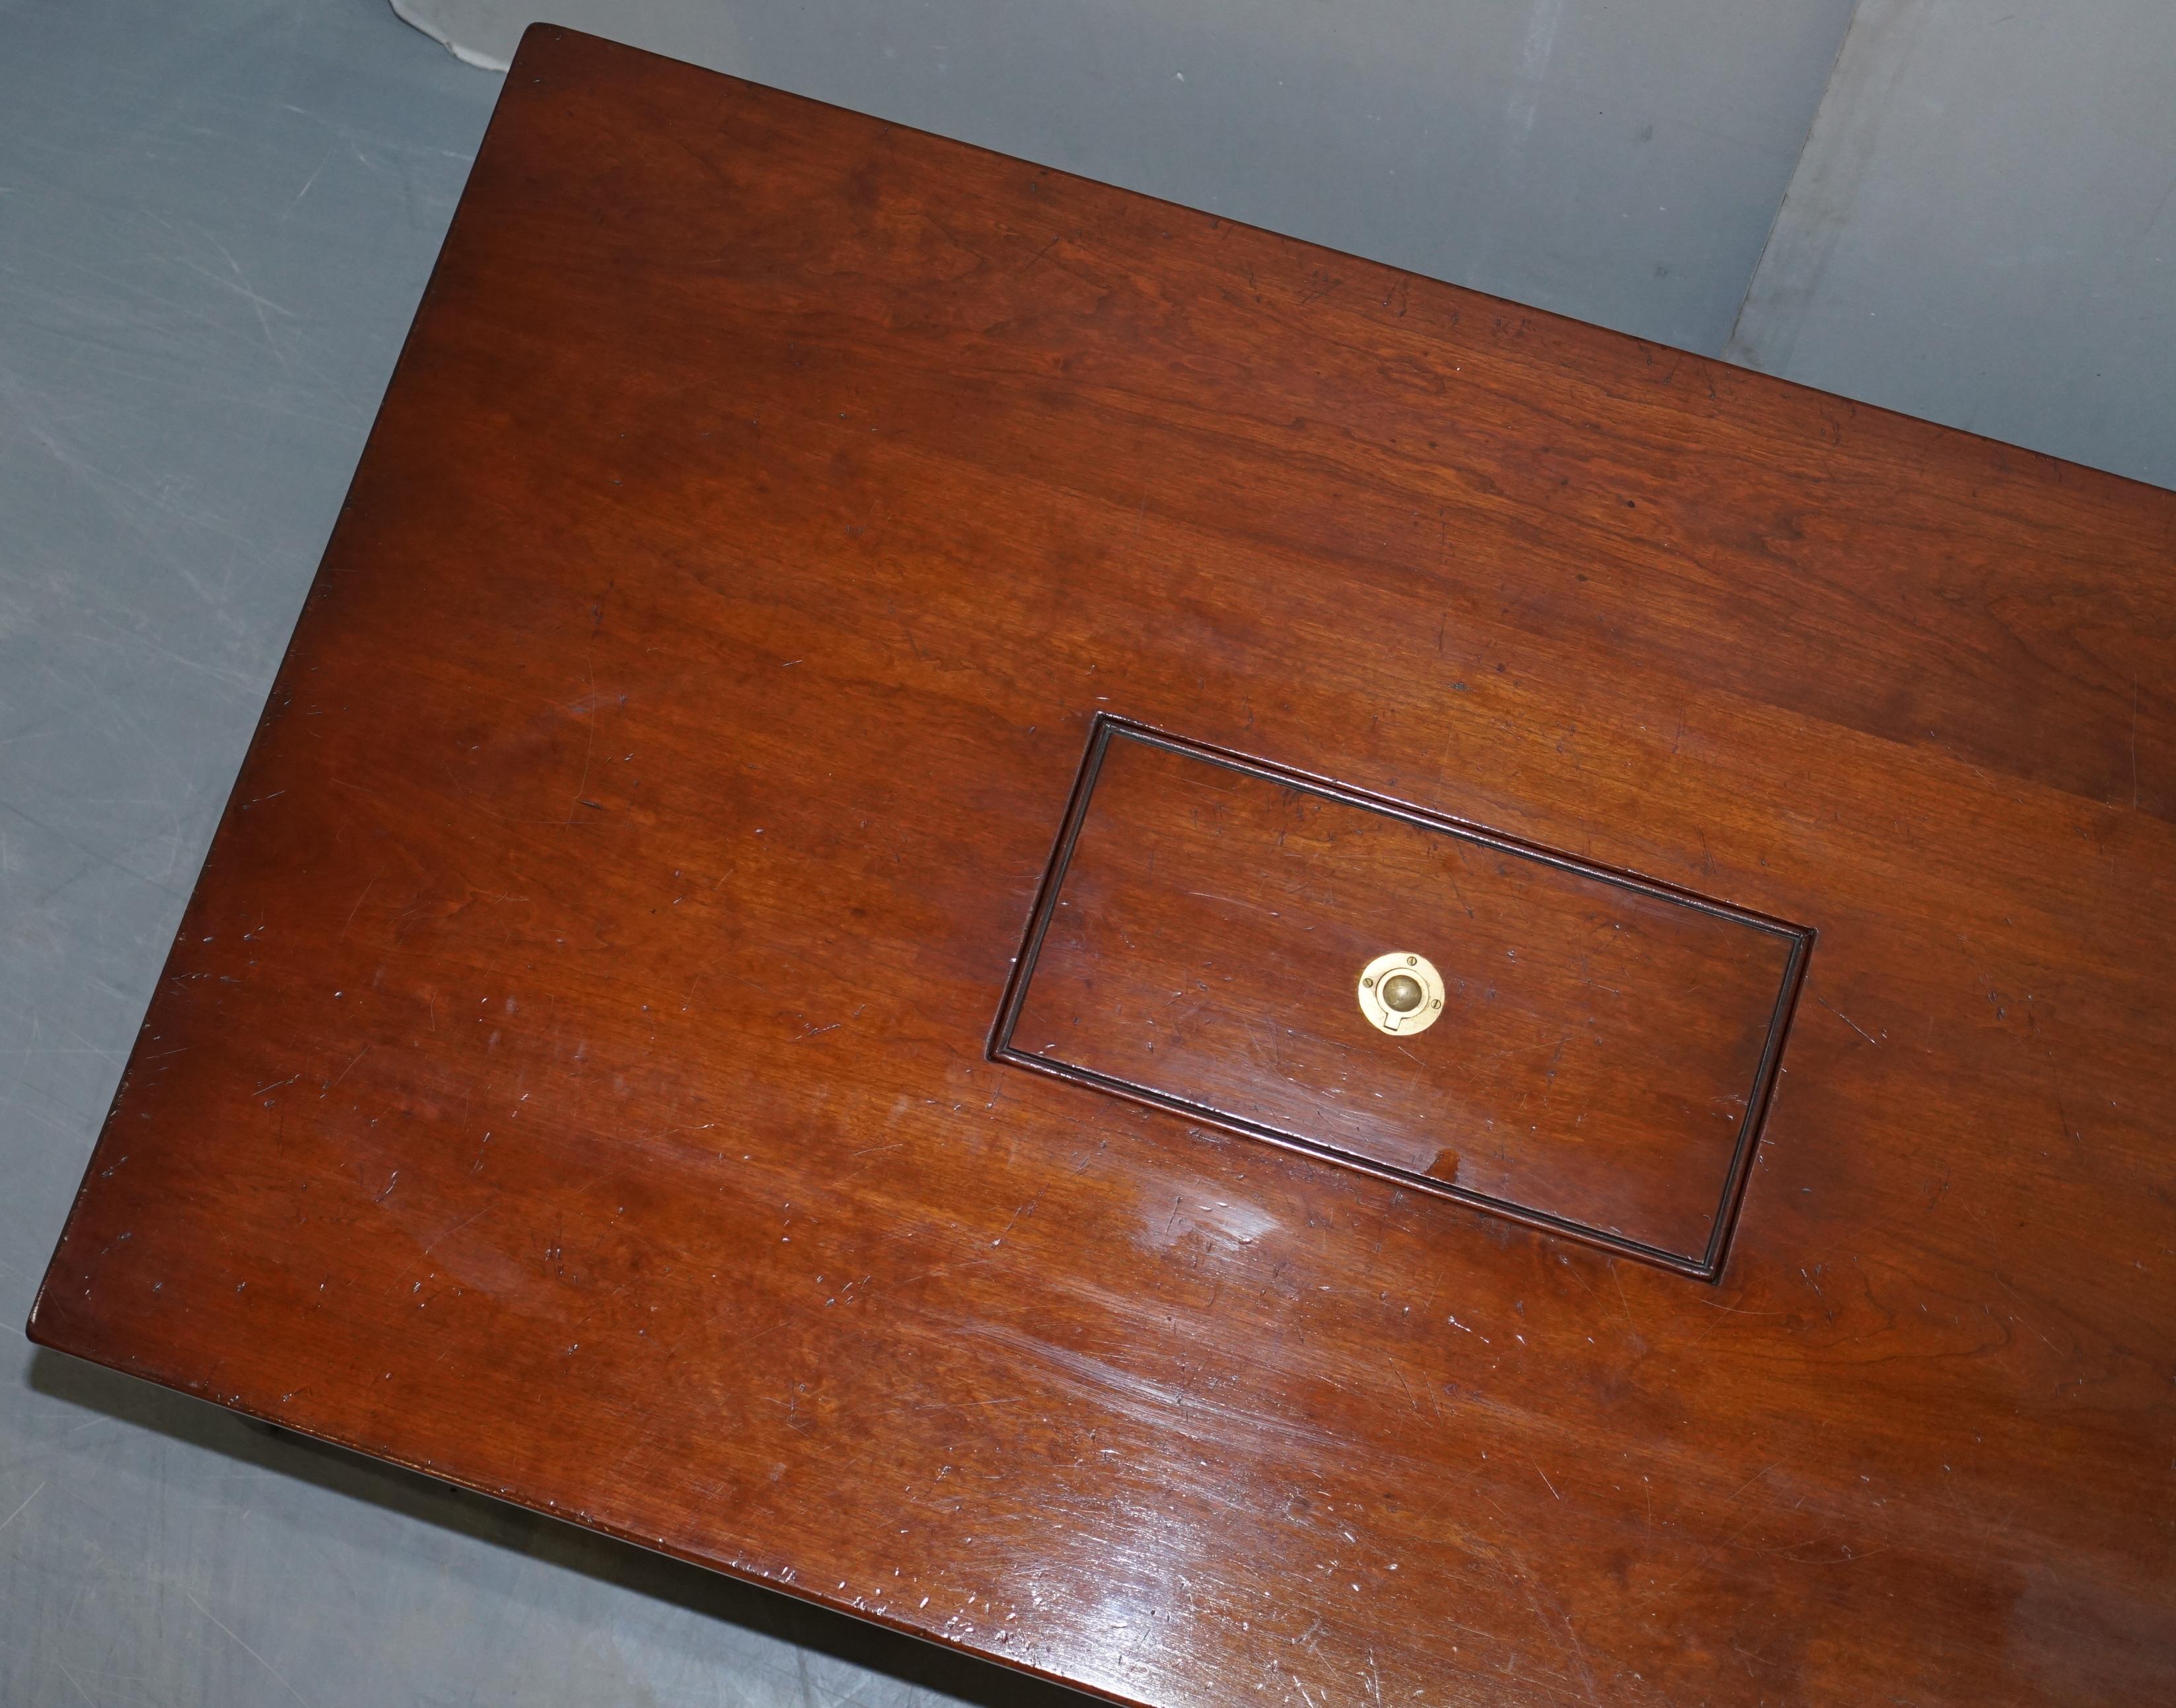 1 of 2 Hardwood Harrods Kennedy Military Campaign Coffee Table Internal Storage 1